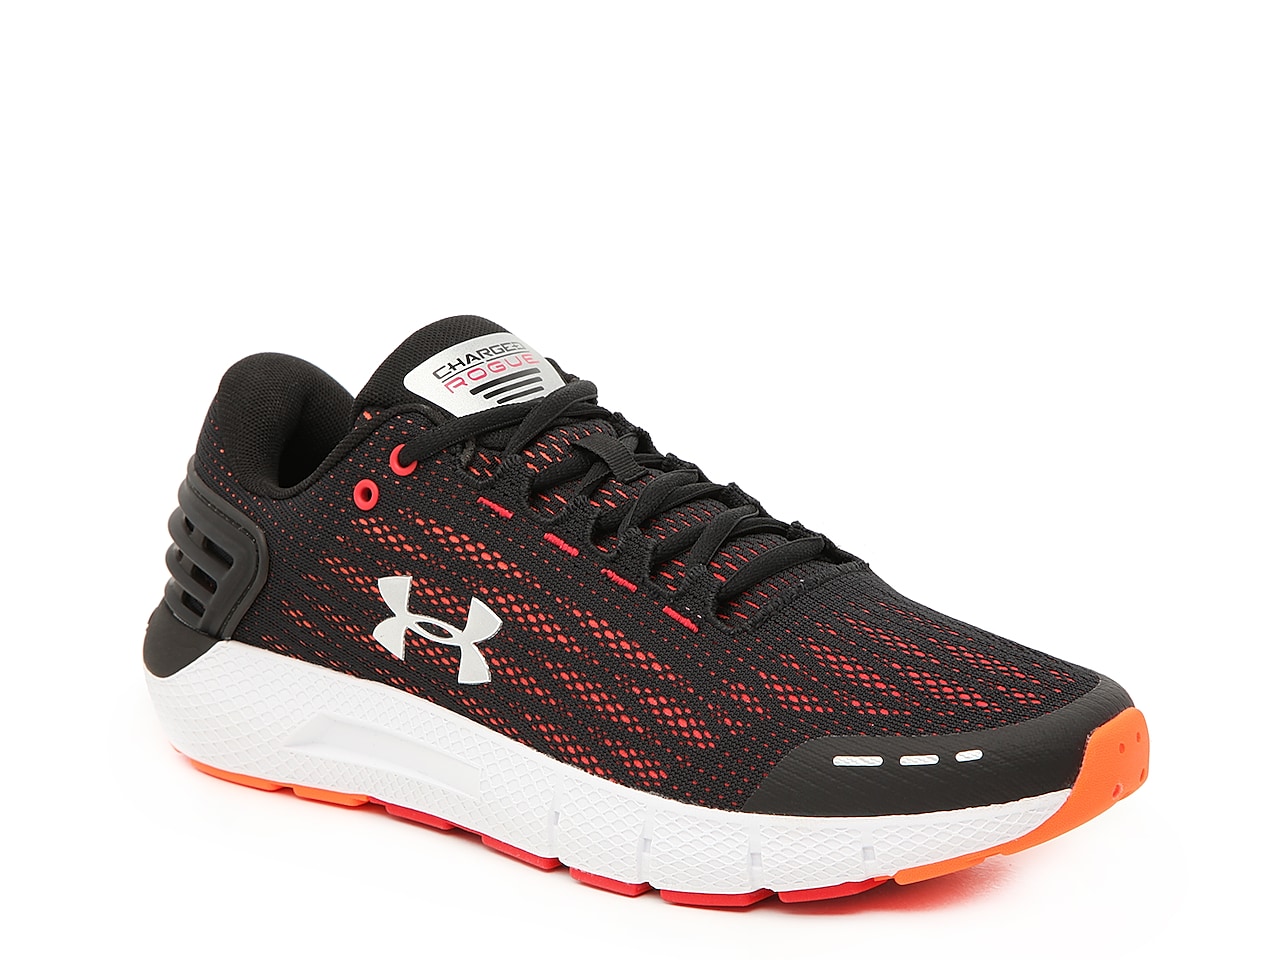 Under Armour Charged Rogue Lightweight Running Shoe - Men's | DSW